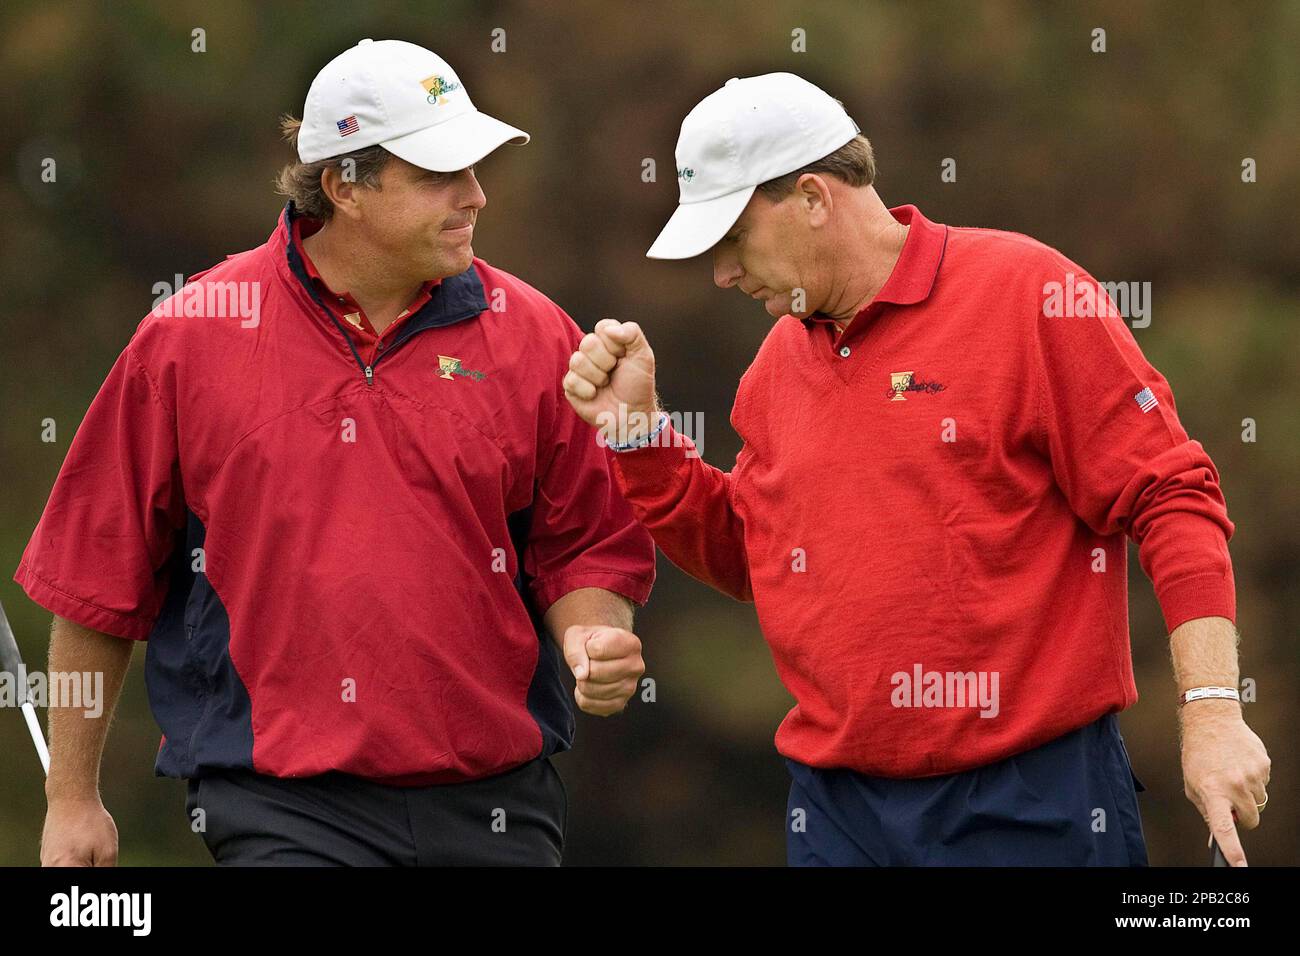 United States team members Phil Mickelson, left, and Woody Austin